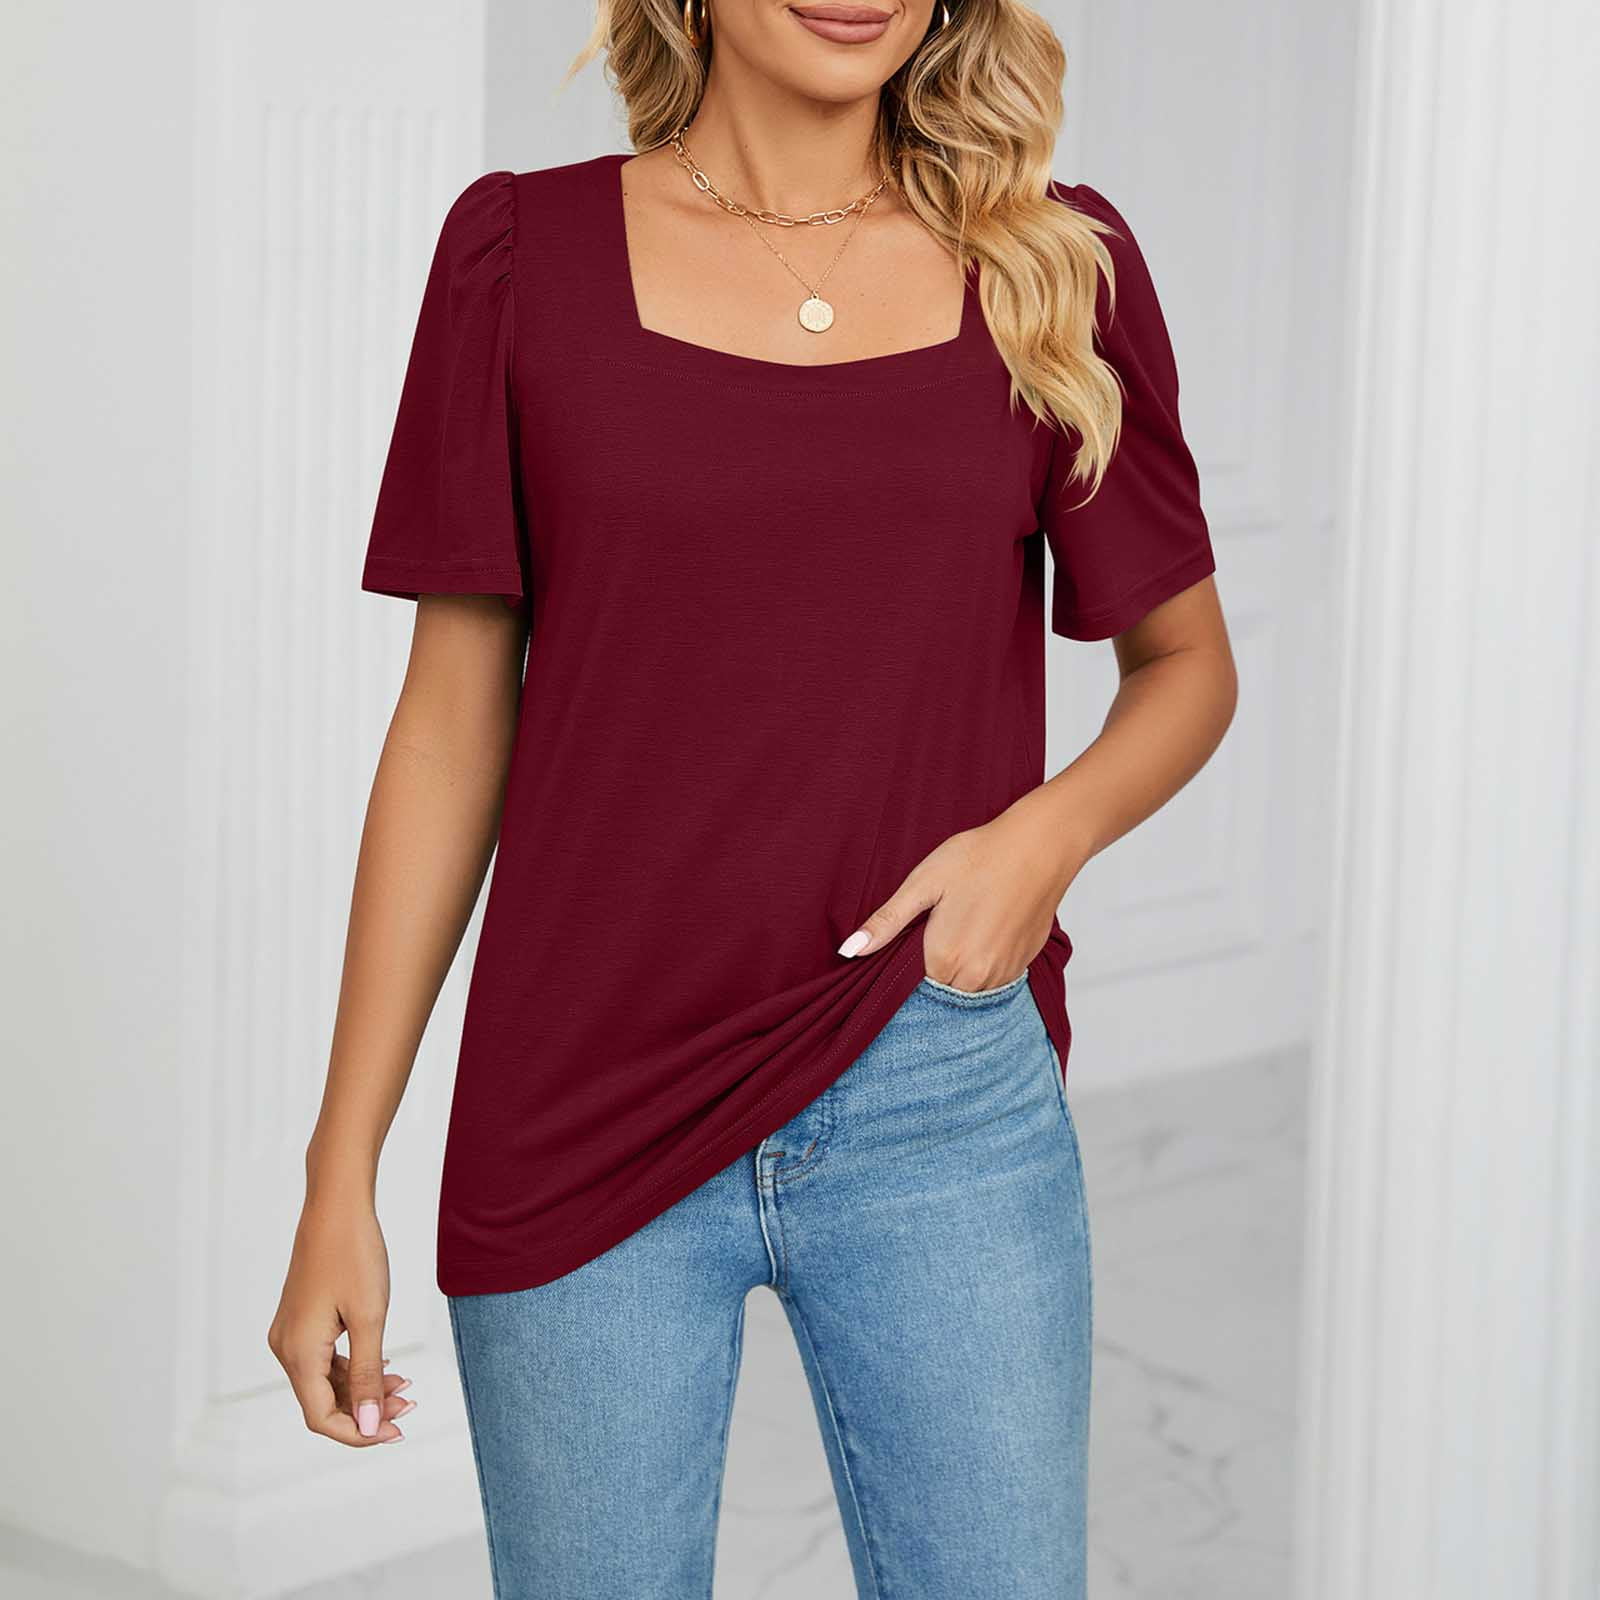 Njoeus Oversized T-shirts for Women Loose Fit Square Neck Short Sleeve  T-Shirt Tops Casual Solid Workout Shirts Summer